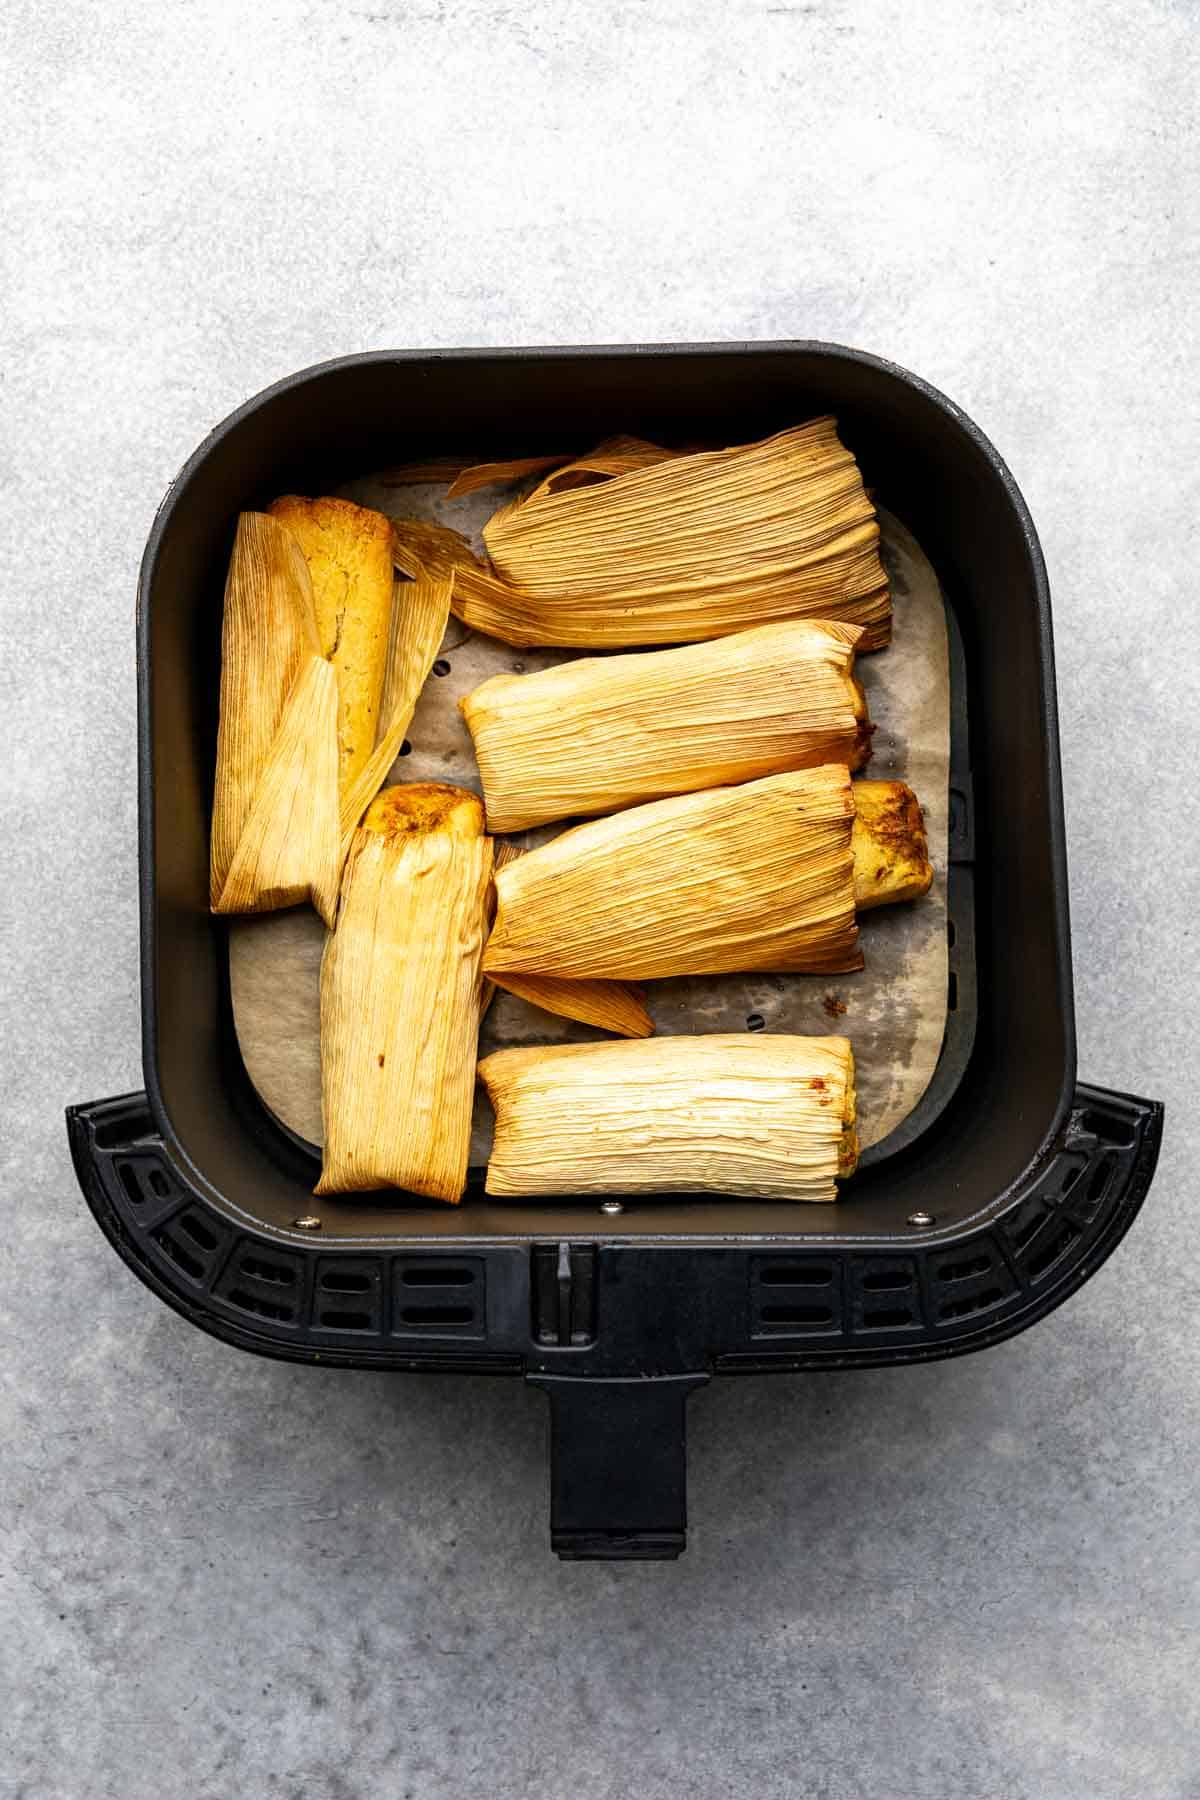 Cooked tamales in an air fryer basket.